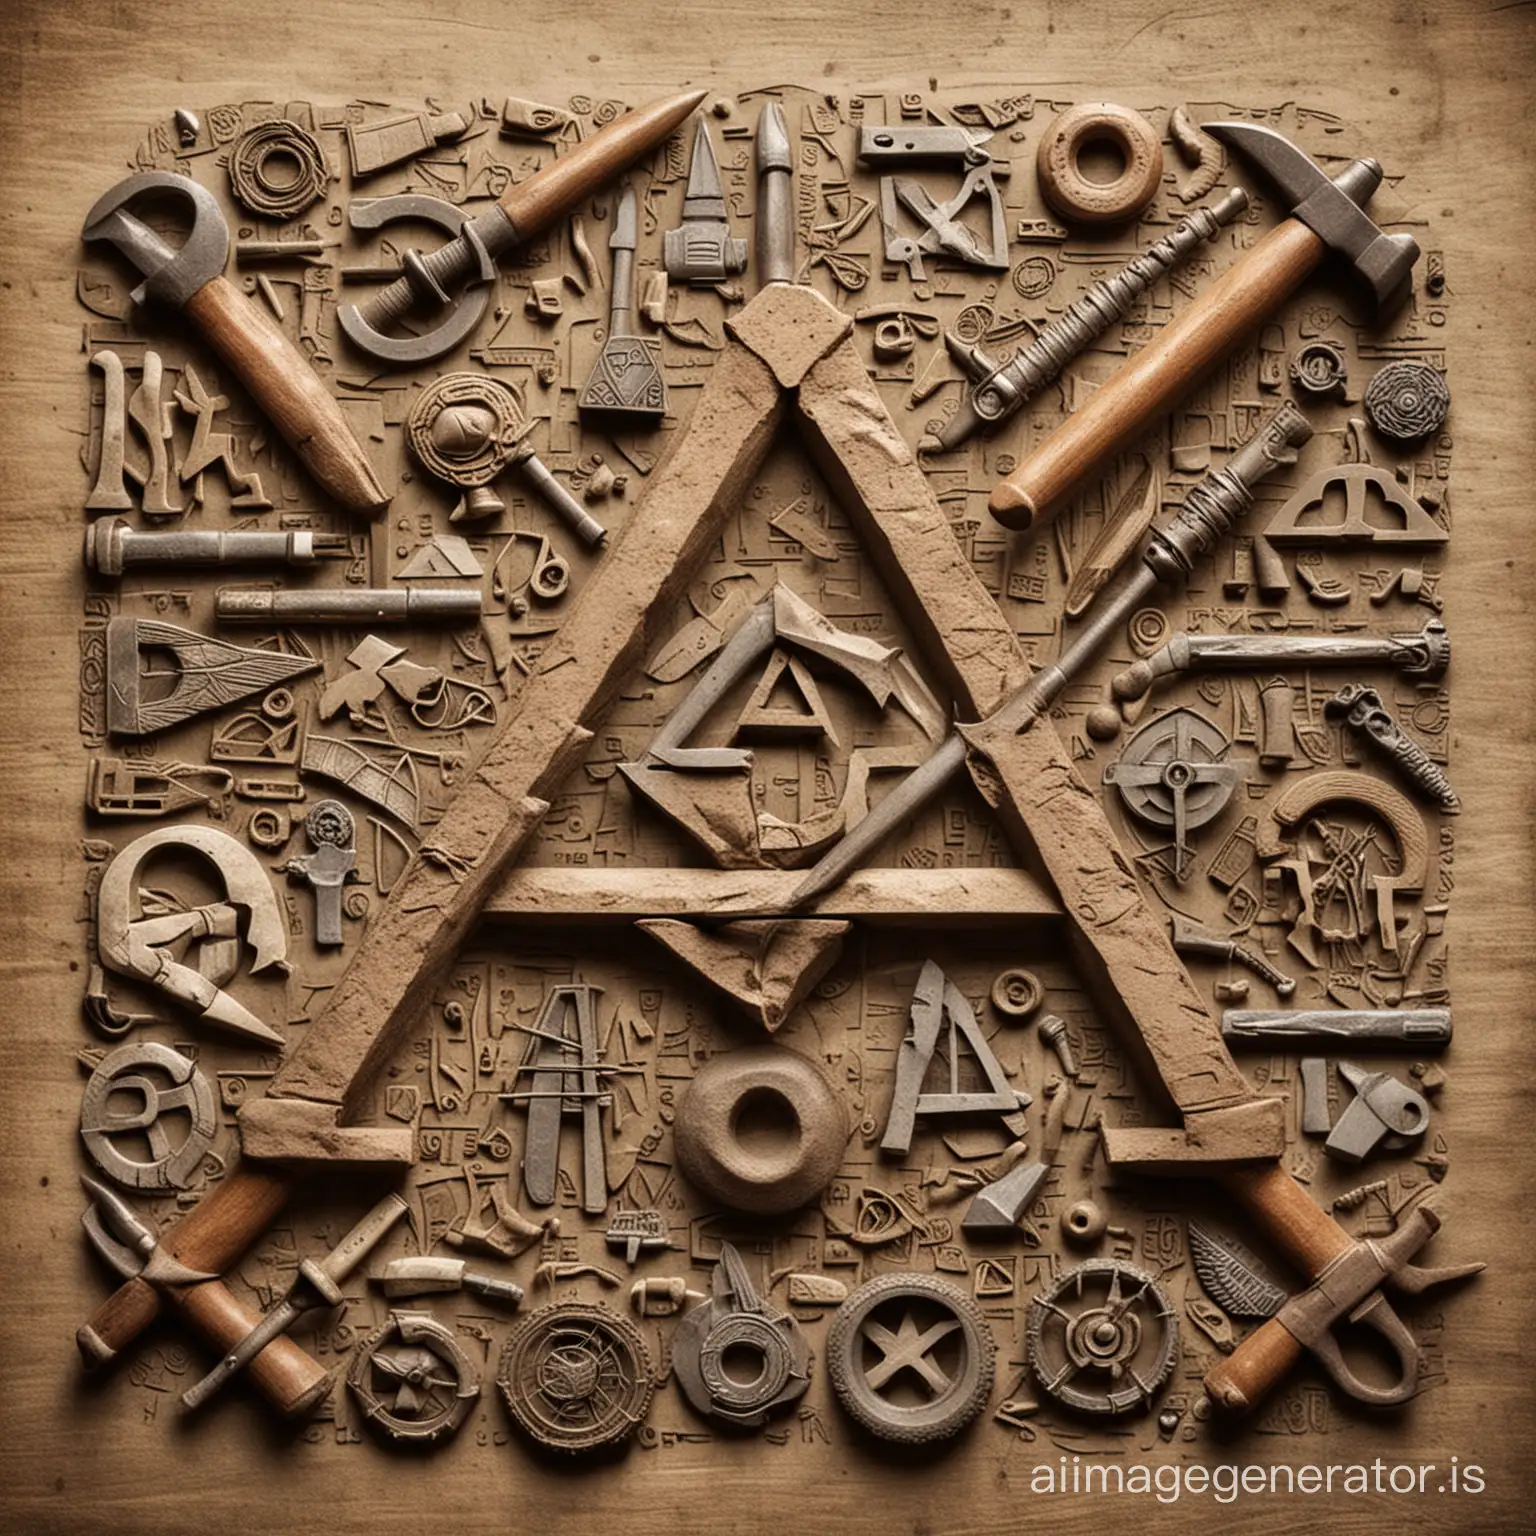 Masonry-Artistry-Collage-of-Symbolic-Tools-and-Techniques